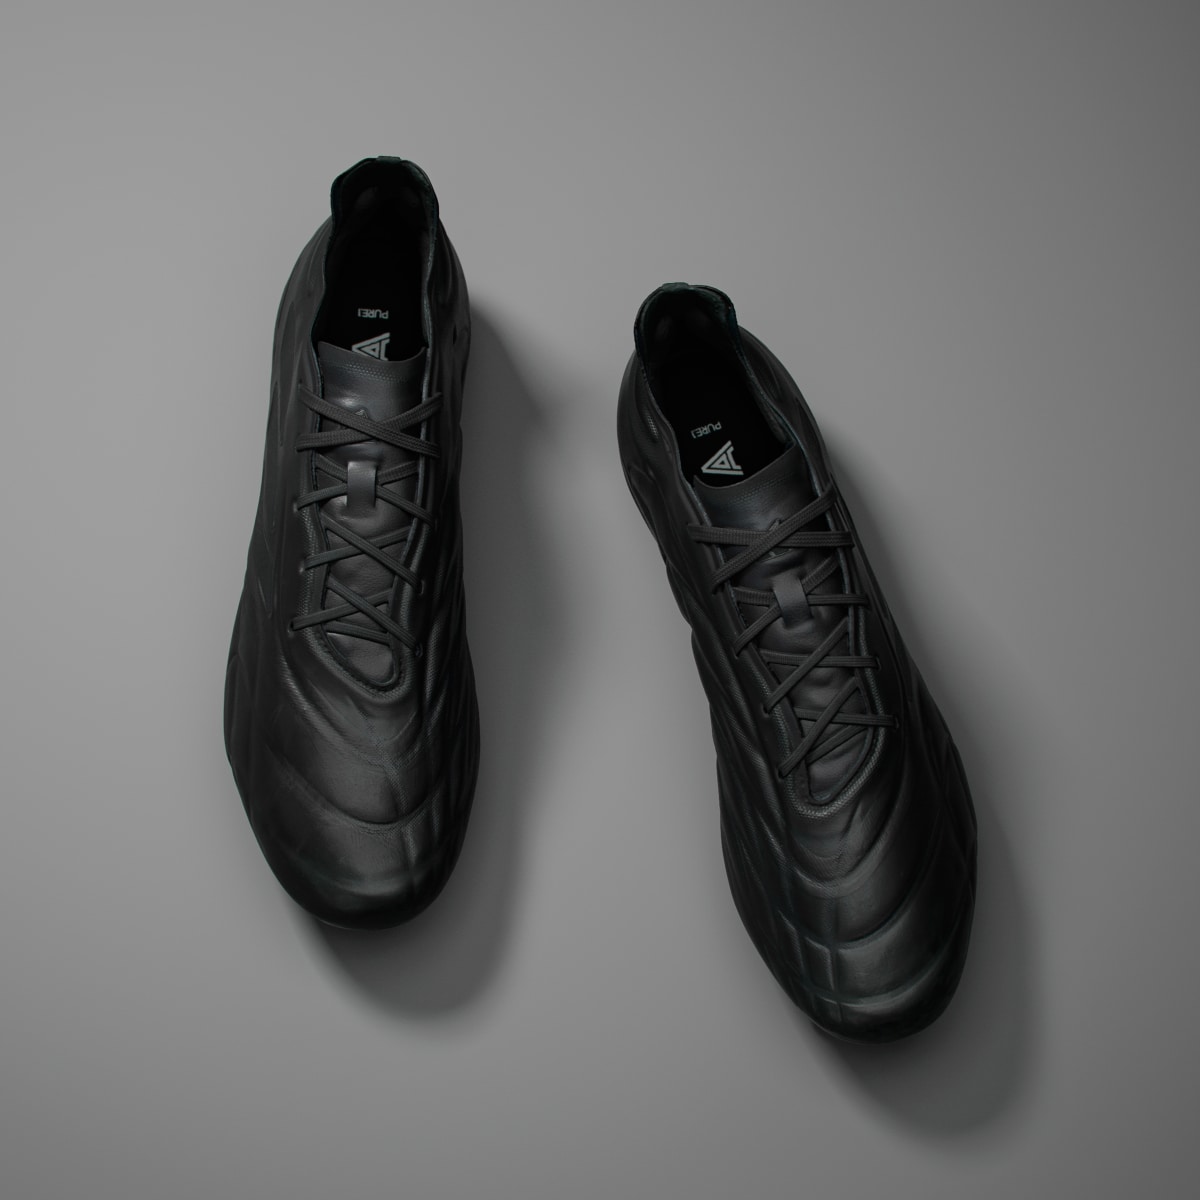 Adidas Copa Pure.1 Firm Ground Boots. 4